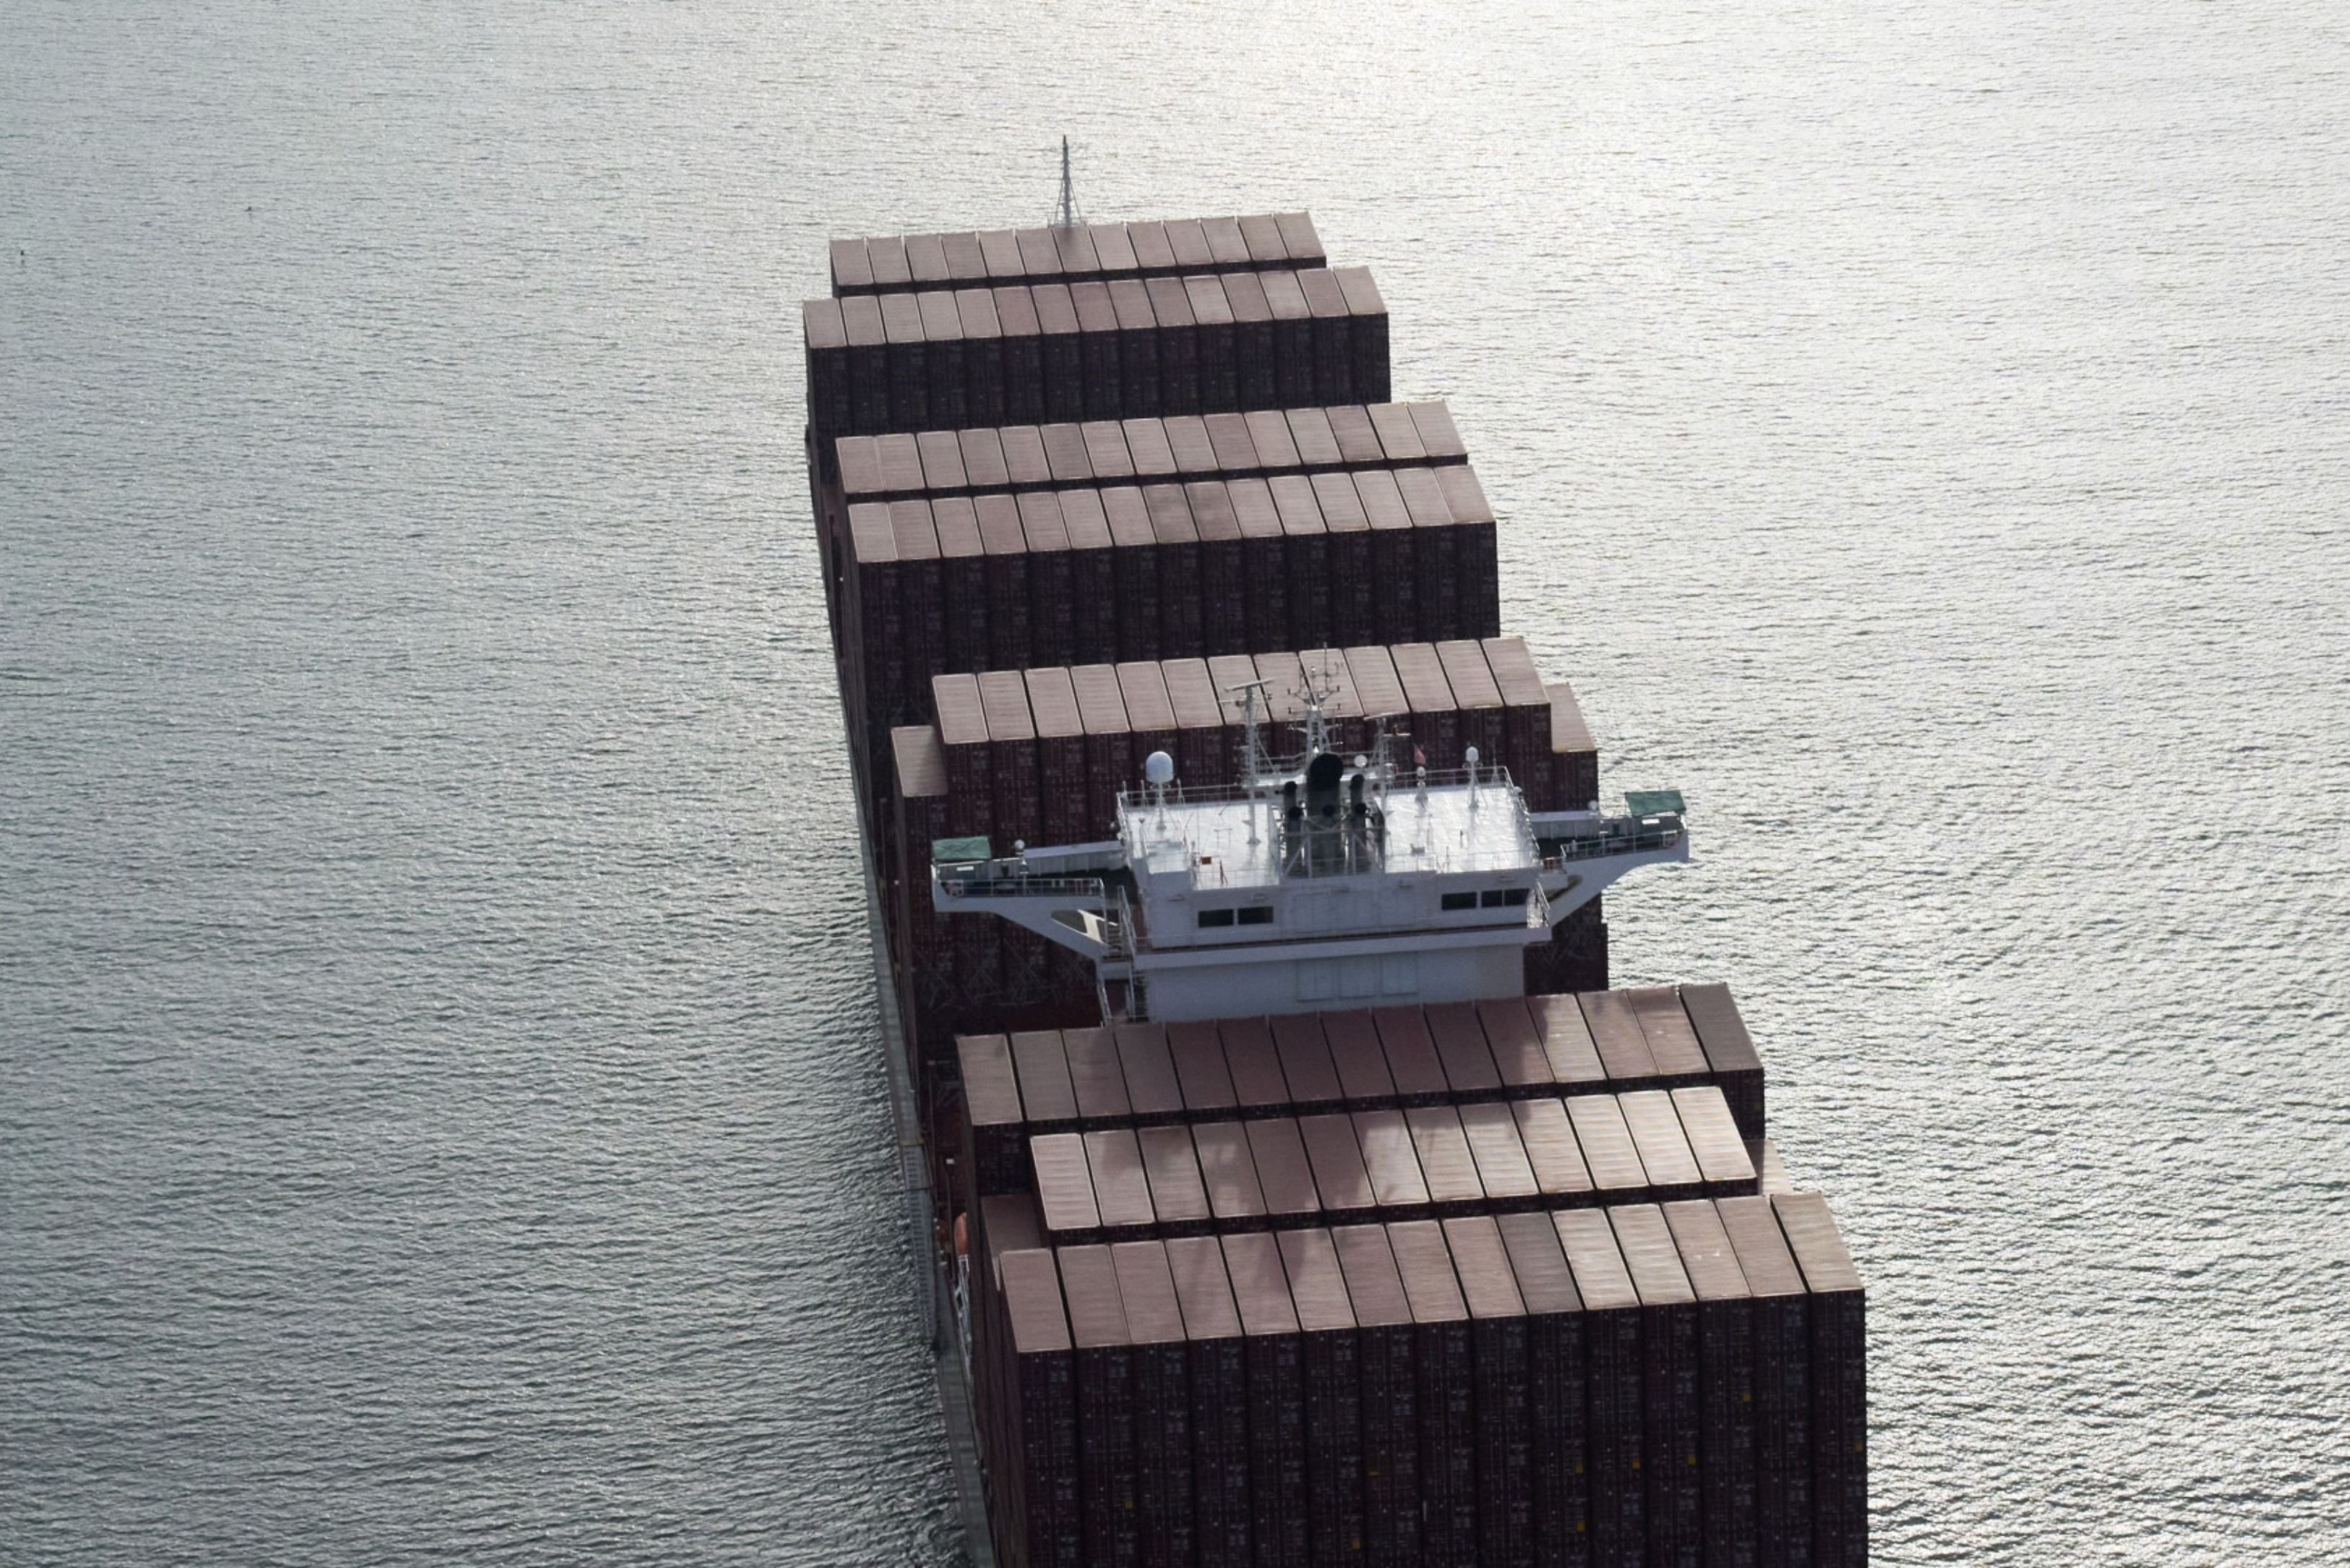 Container ship bloomberg